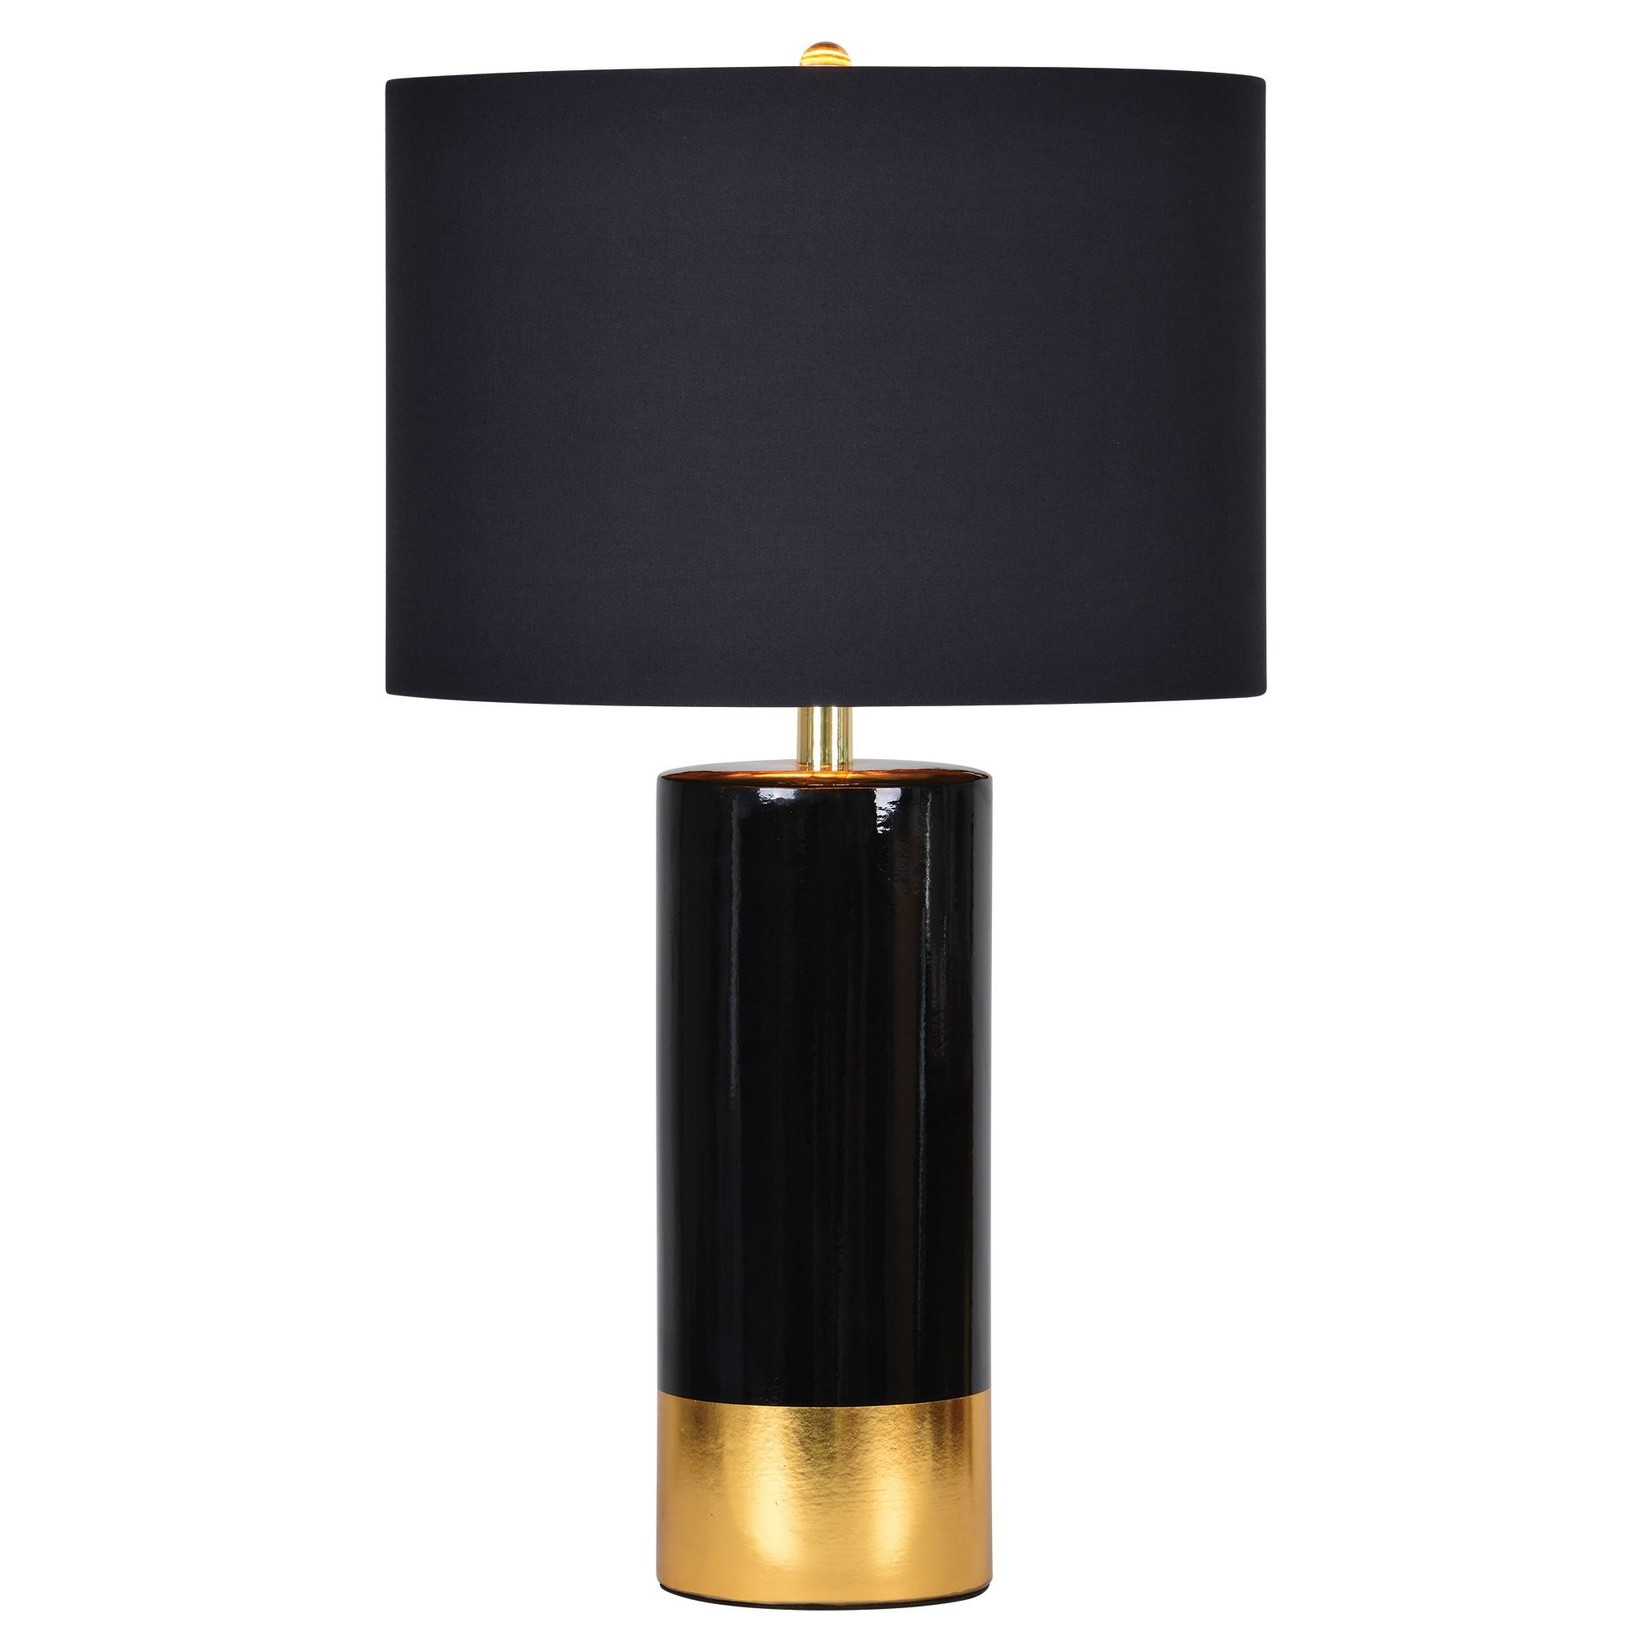 The Tuxedo Black and Gold Lamp